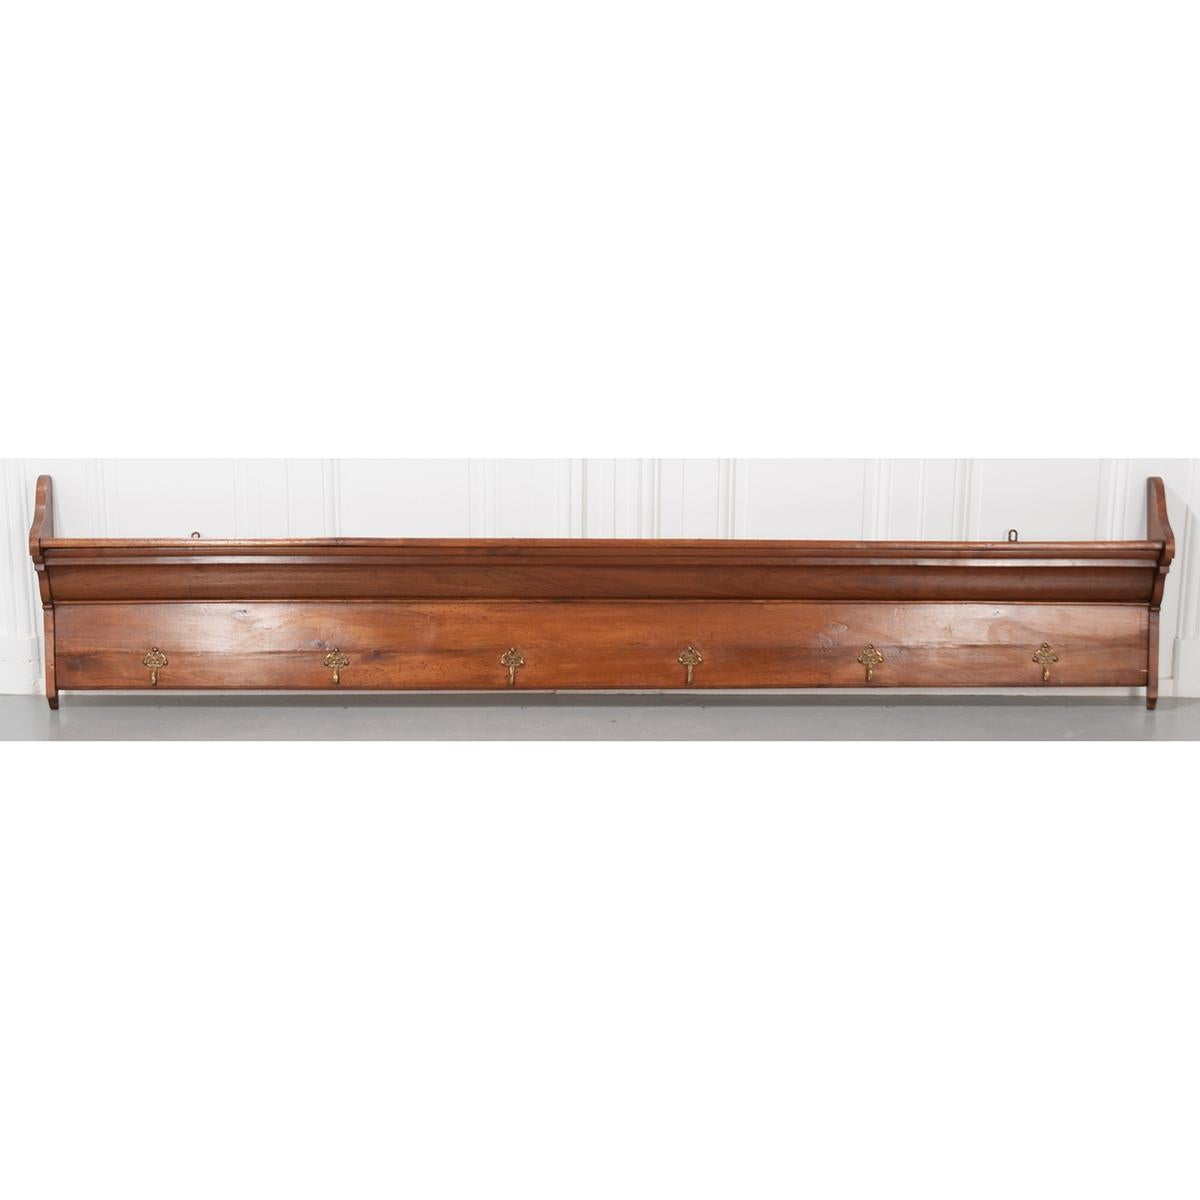 Other French 19th Century Fruitwood Plate and Coat Rack For Sale